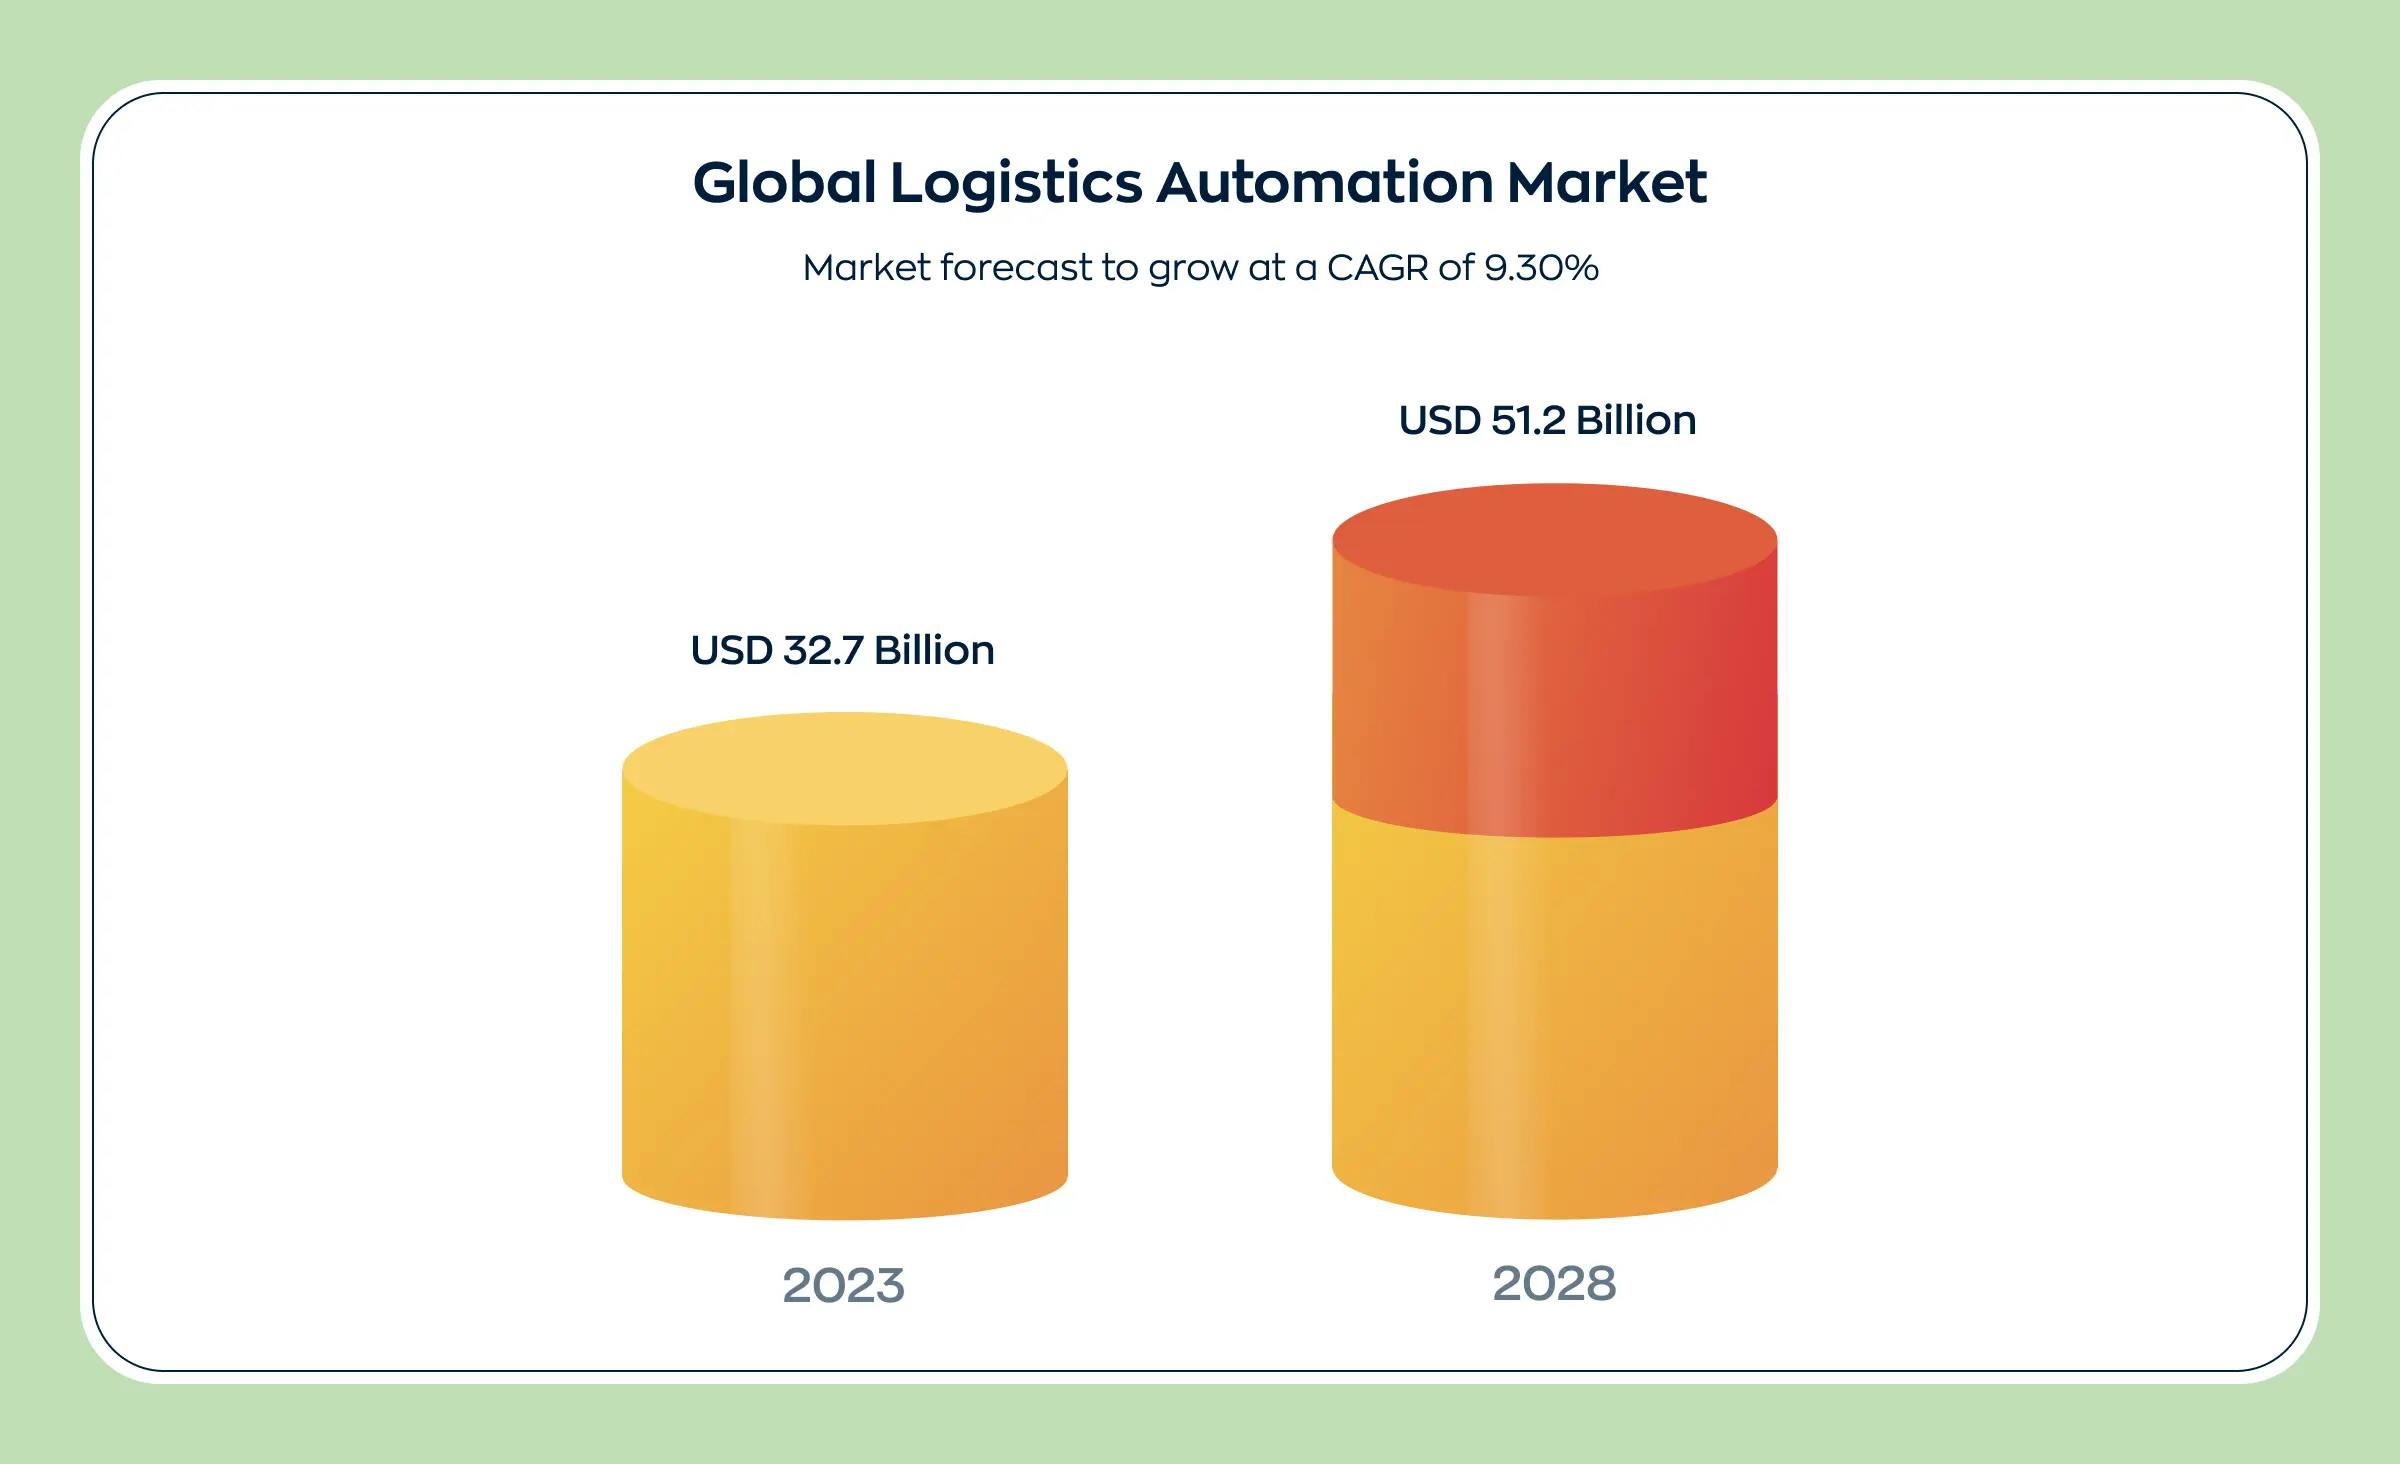 Two bar charts illustrate the progress of the logistics automation market from 2023 ($32.7B) to 2028 ($51.2B). The compound annual growth rate is expected to result in a 9.30% increase. This automation is attained through logistics software development, IoT implementation, and the implementation of the latest AI technologies.